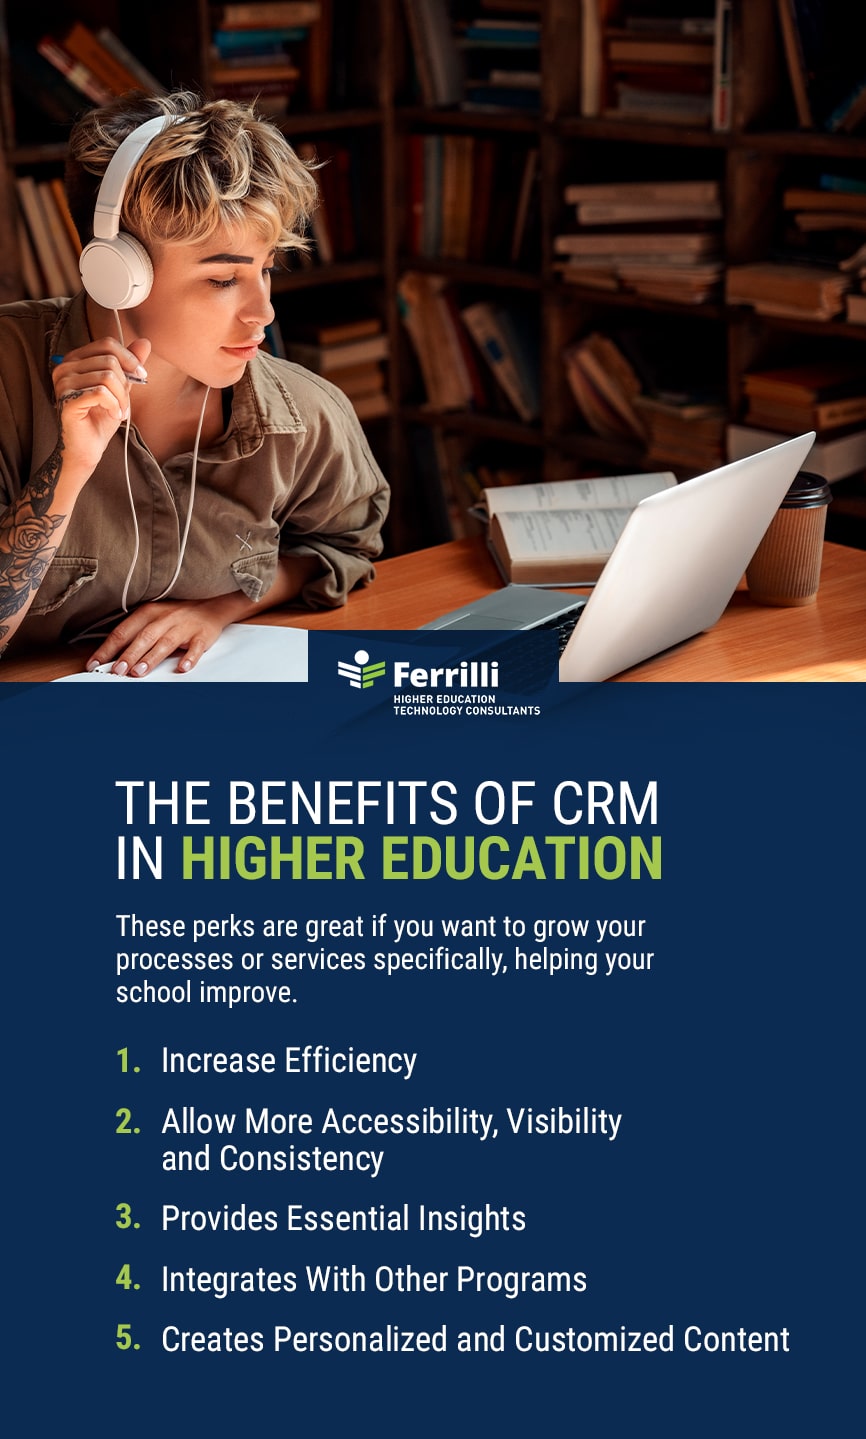 The Benefits of CRM in Higher Education